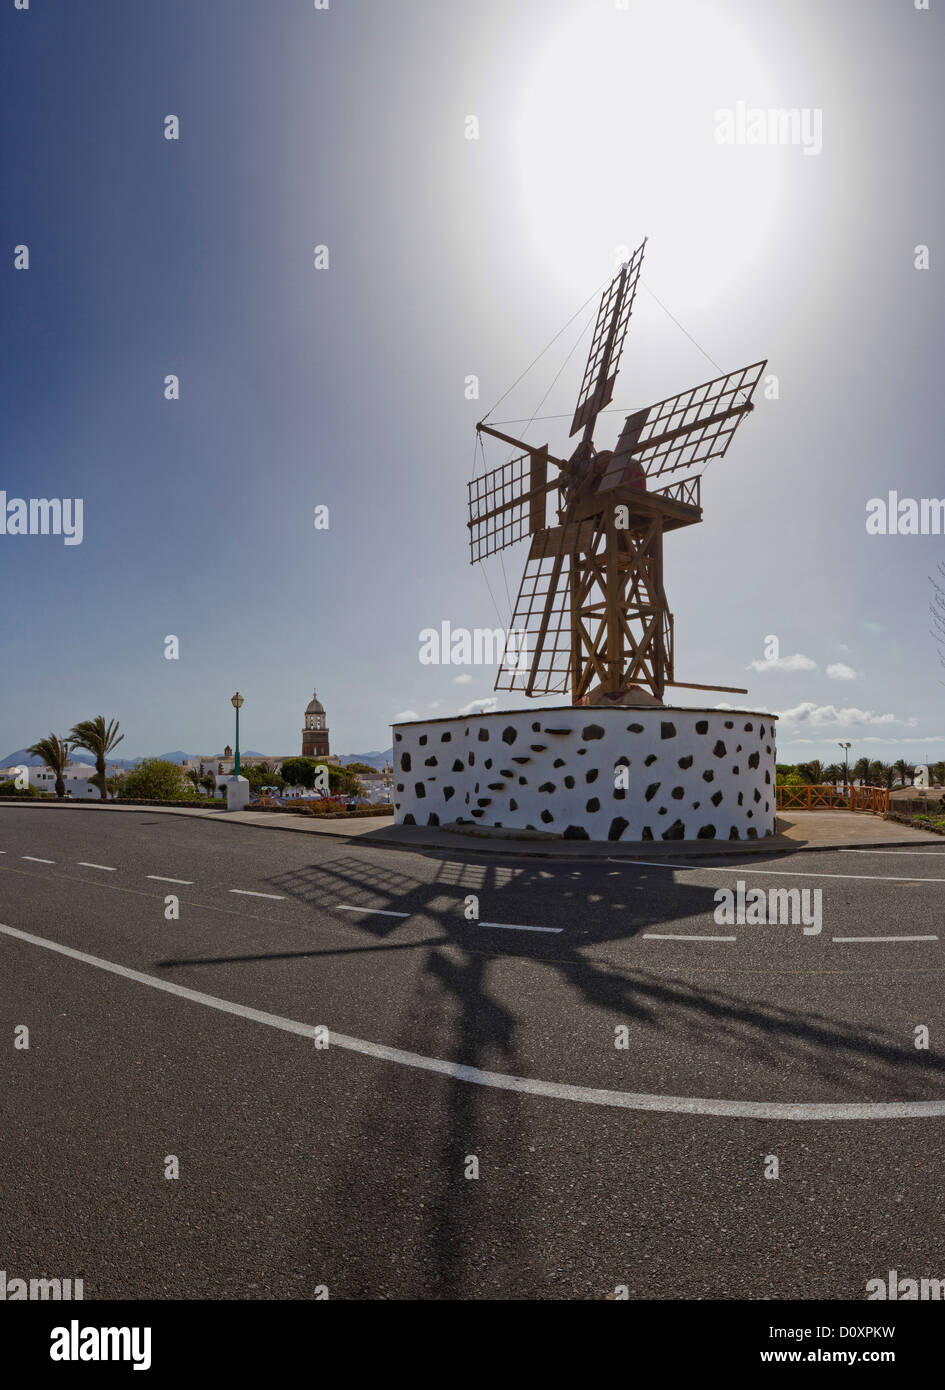 Spain, Lanzarote, Teguise, Skeleton, windmill, windmill, summer, Canary Islands, Stock Photo